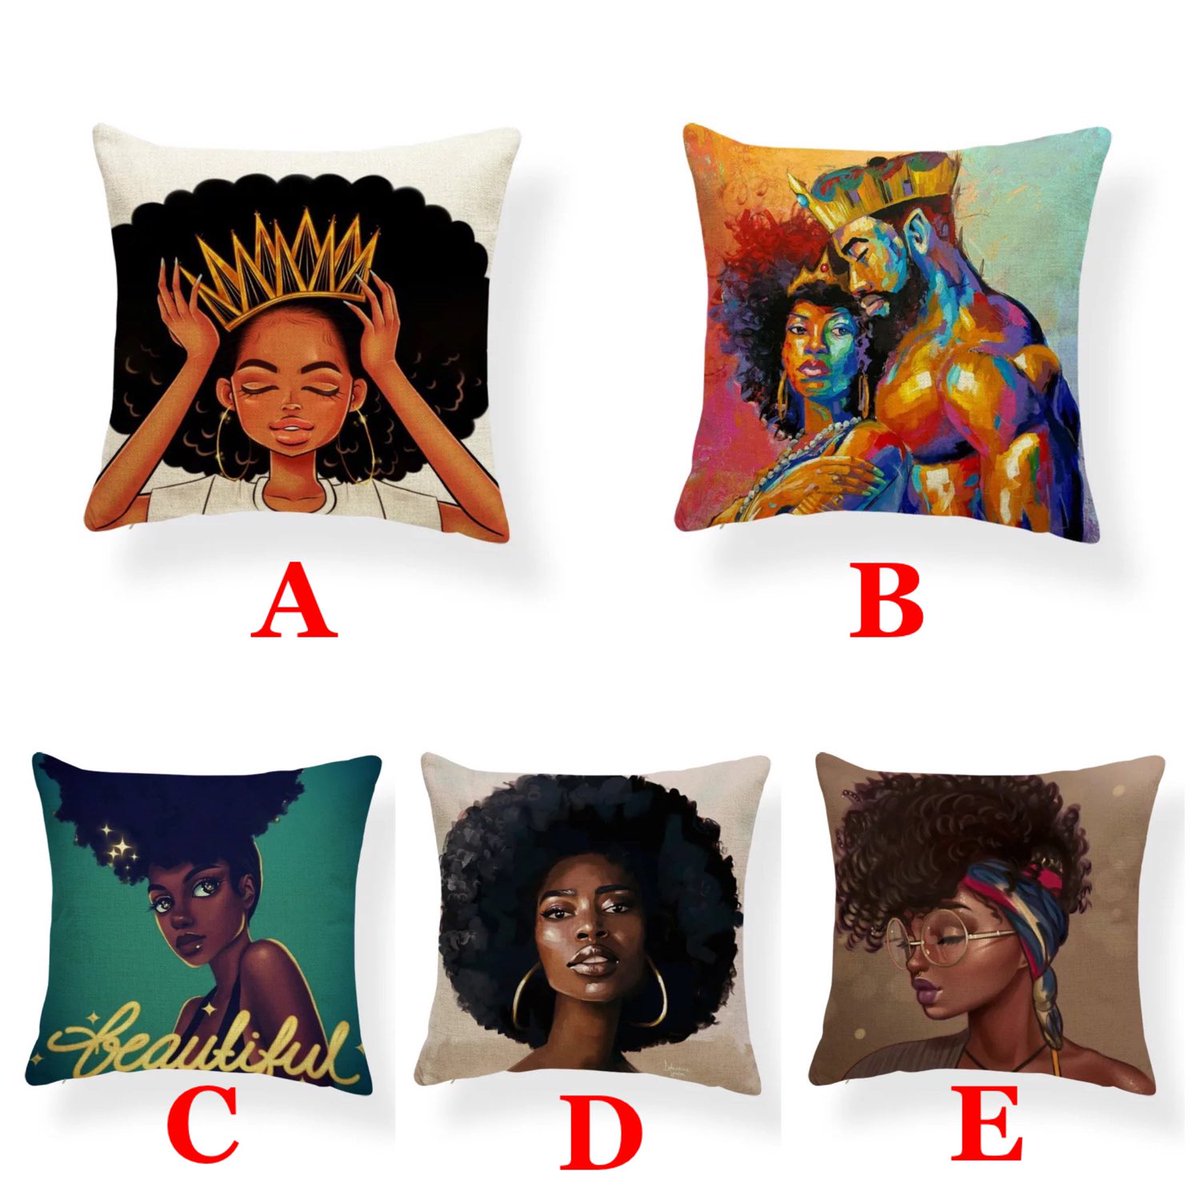 Free shipping in my #etsy shop for these African American Pillow Covers!  #blackdecor #kansascity etsy.me/3DfBW3I